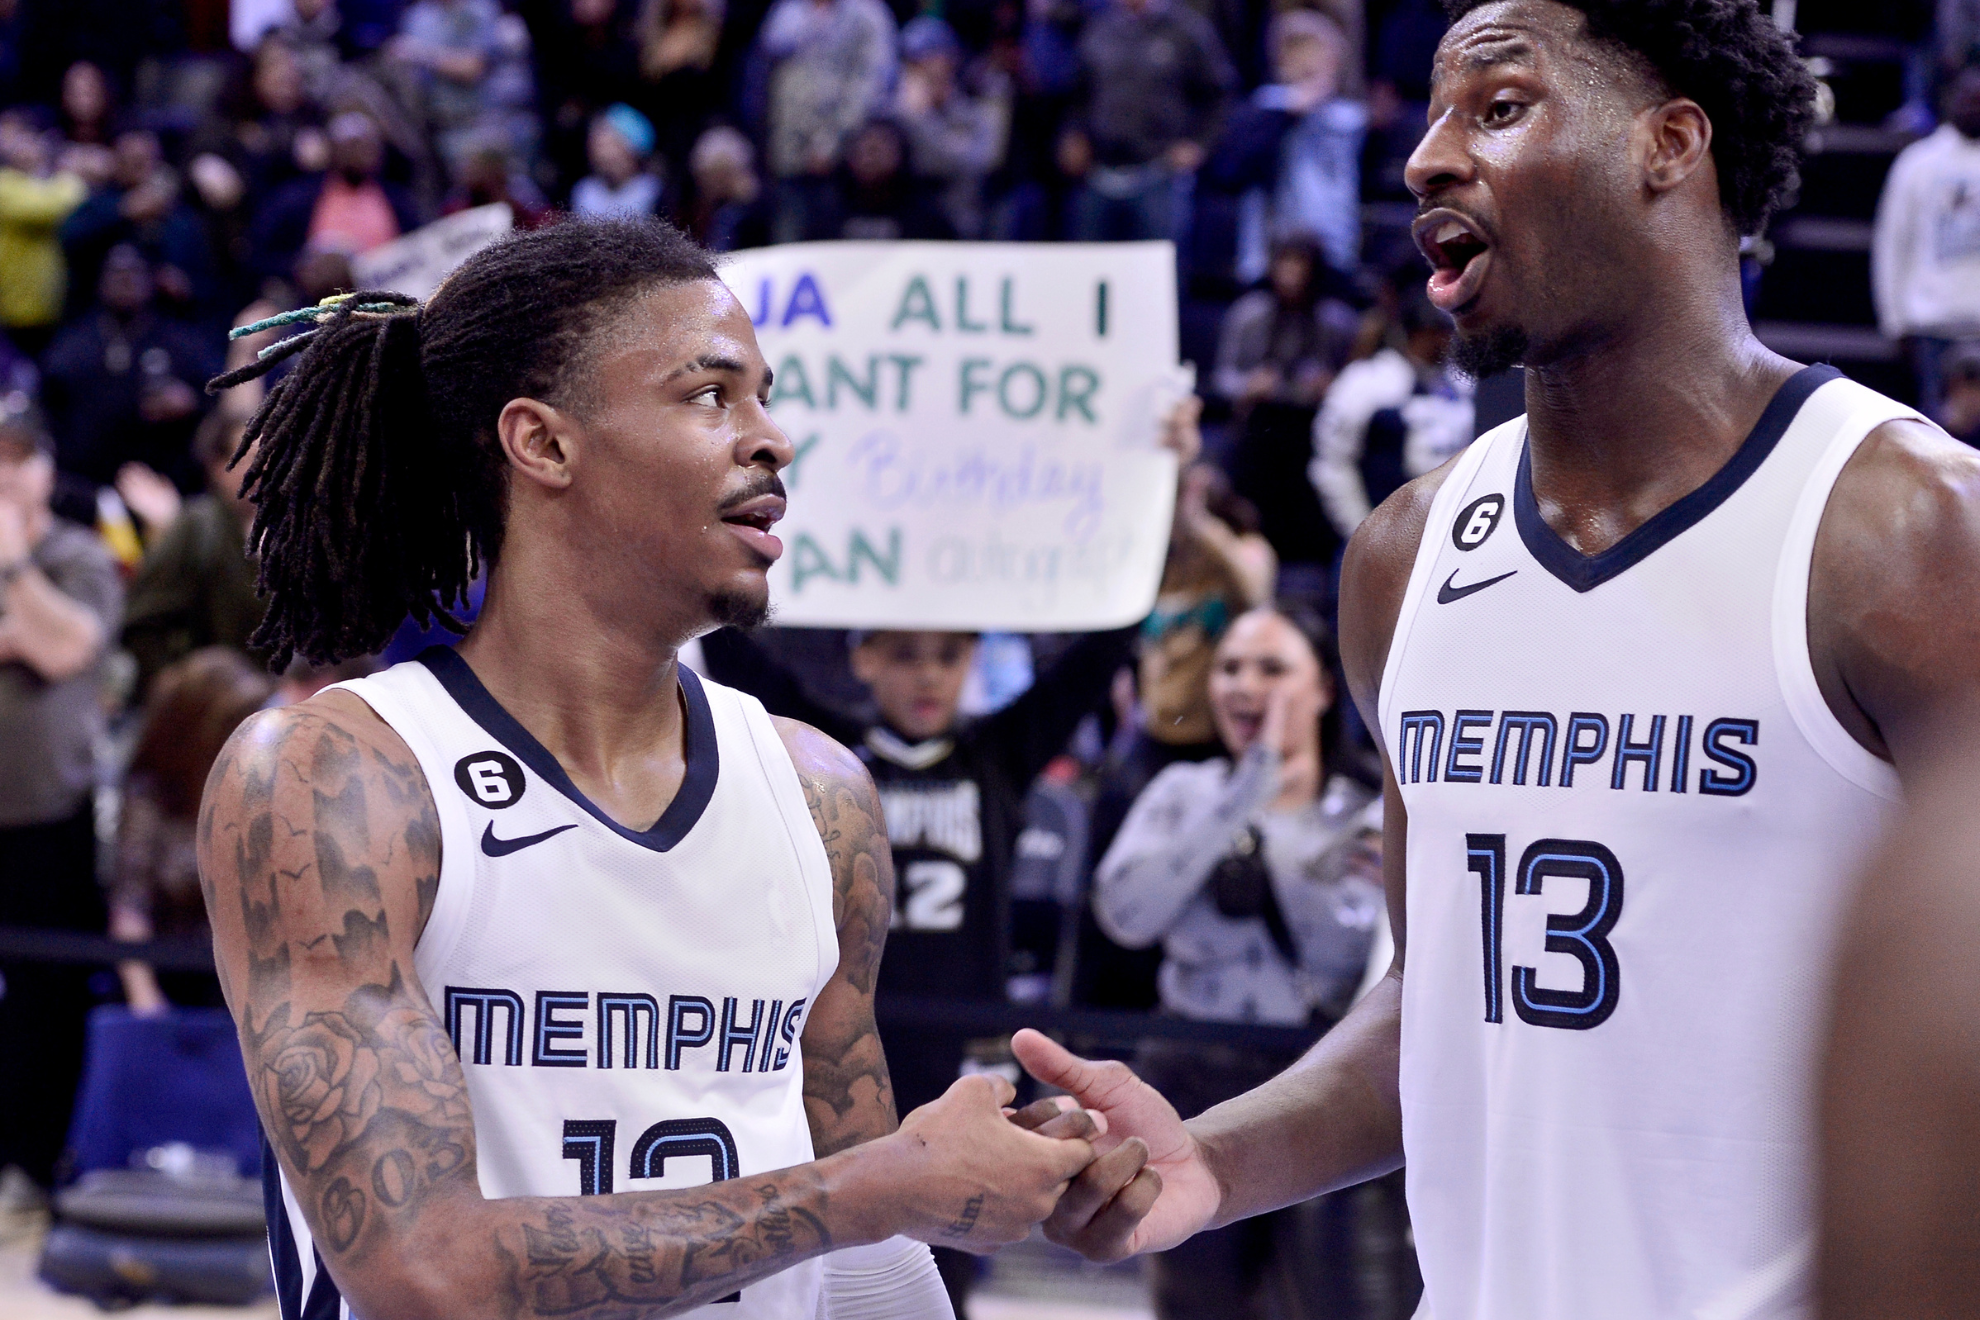 Morant and Jackson have been teammates in Memphis since 2019.